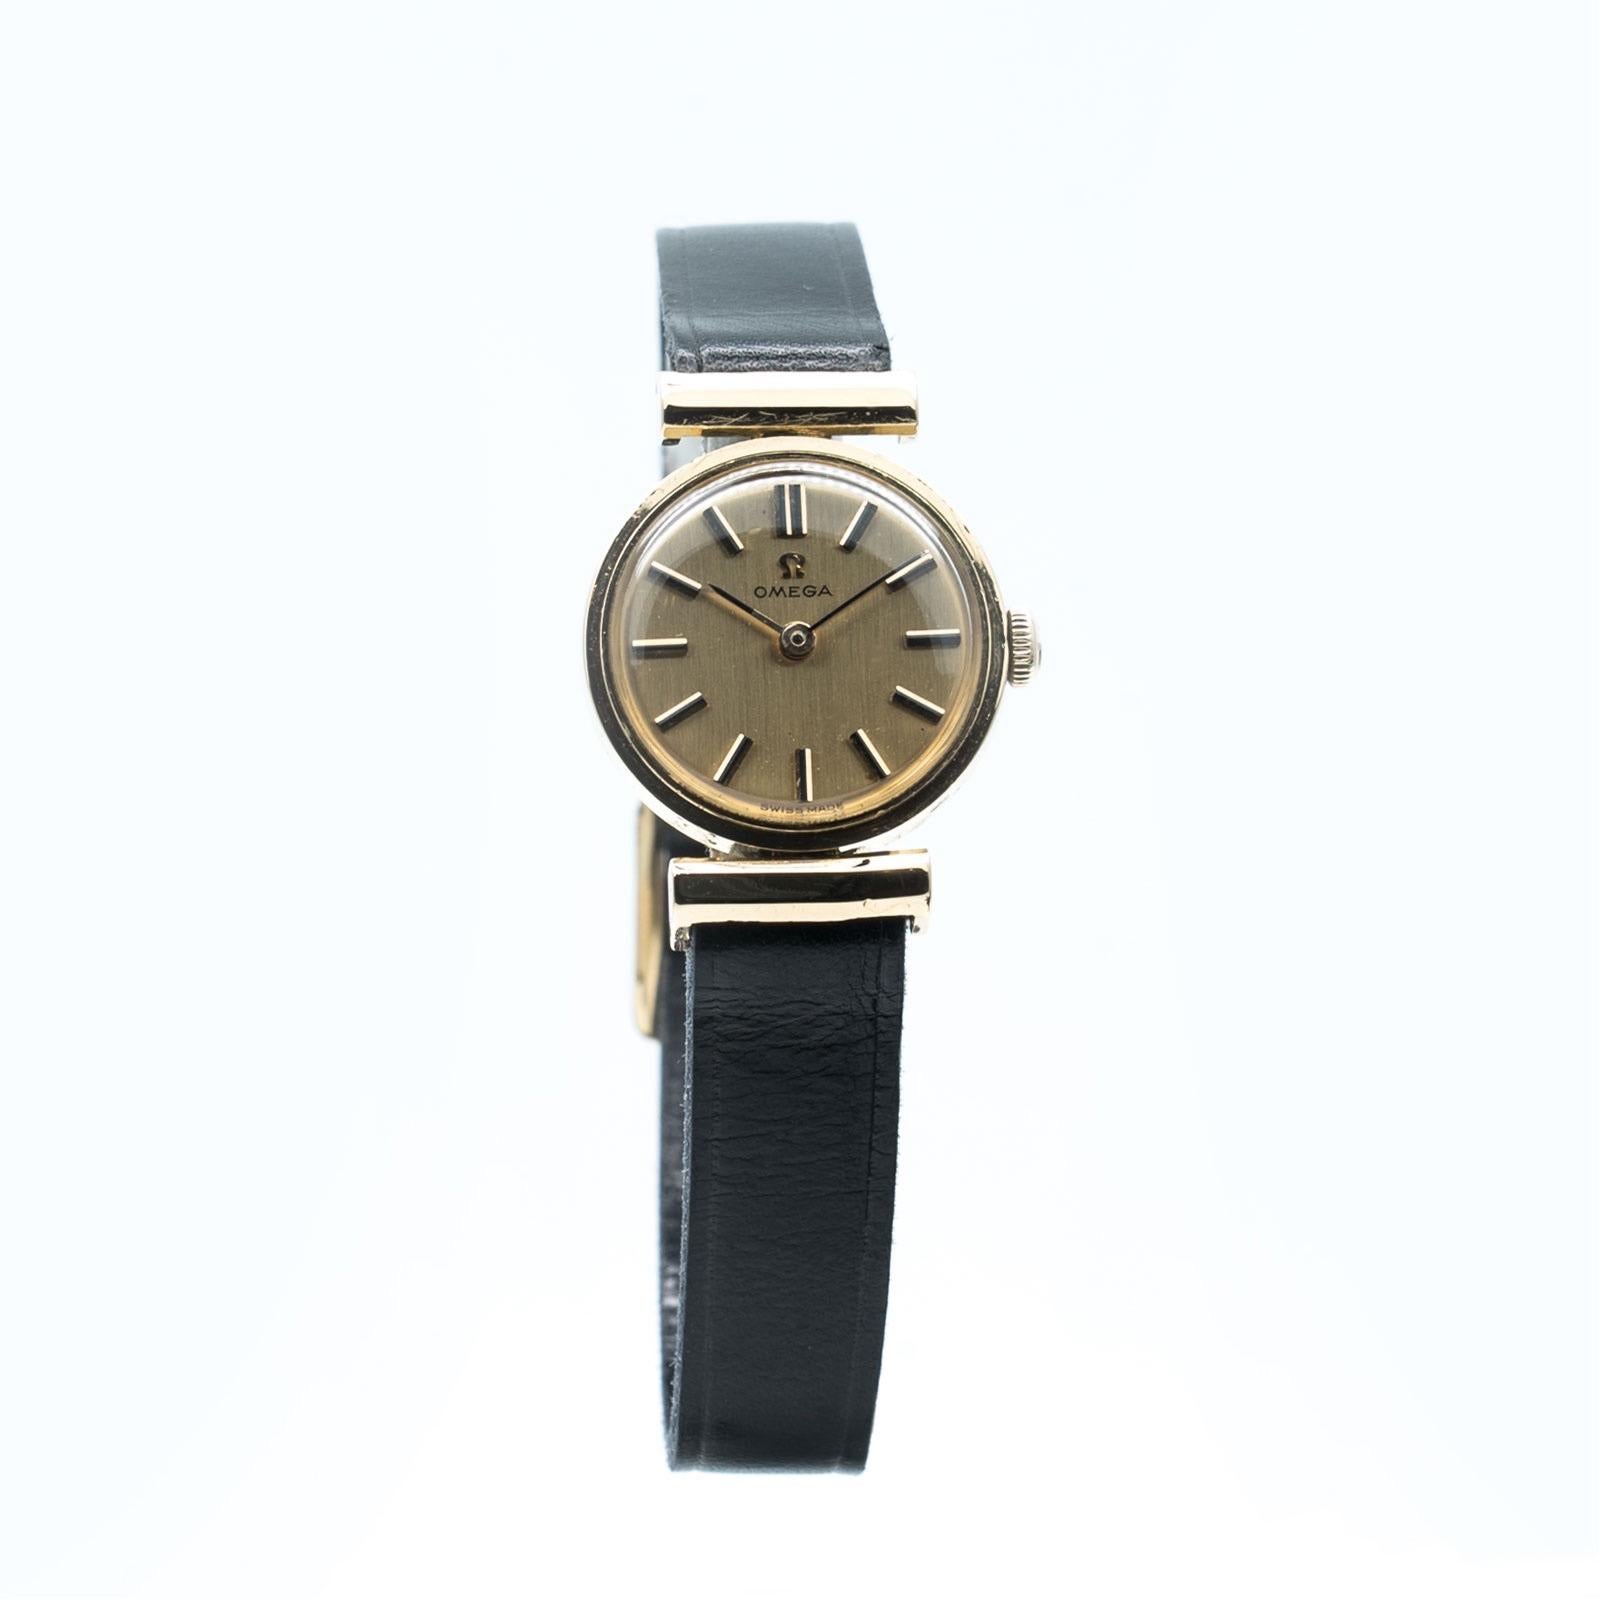 Mid-20th Century Manual Ladies Omega Gold Watch, circa 1960, Swiss Made, Valuated